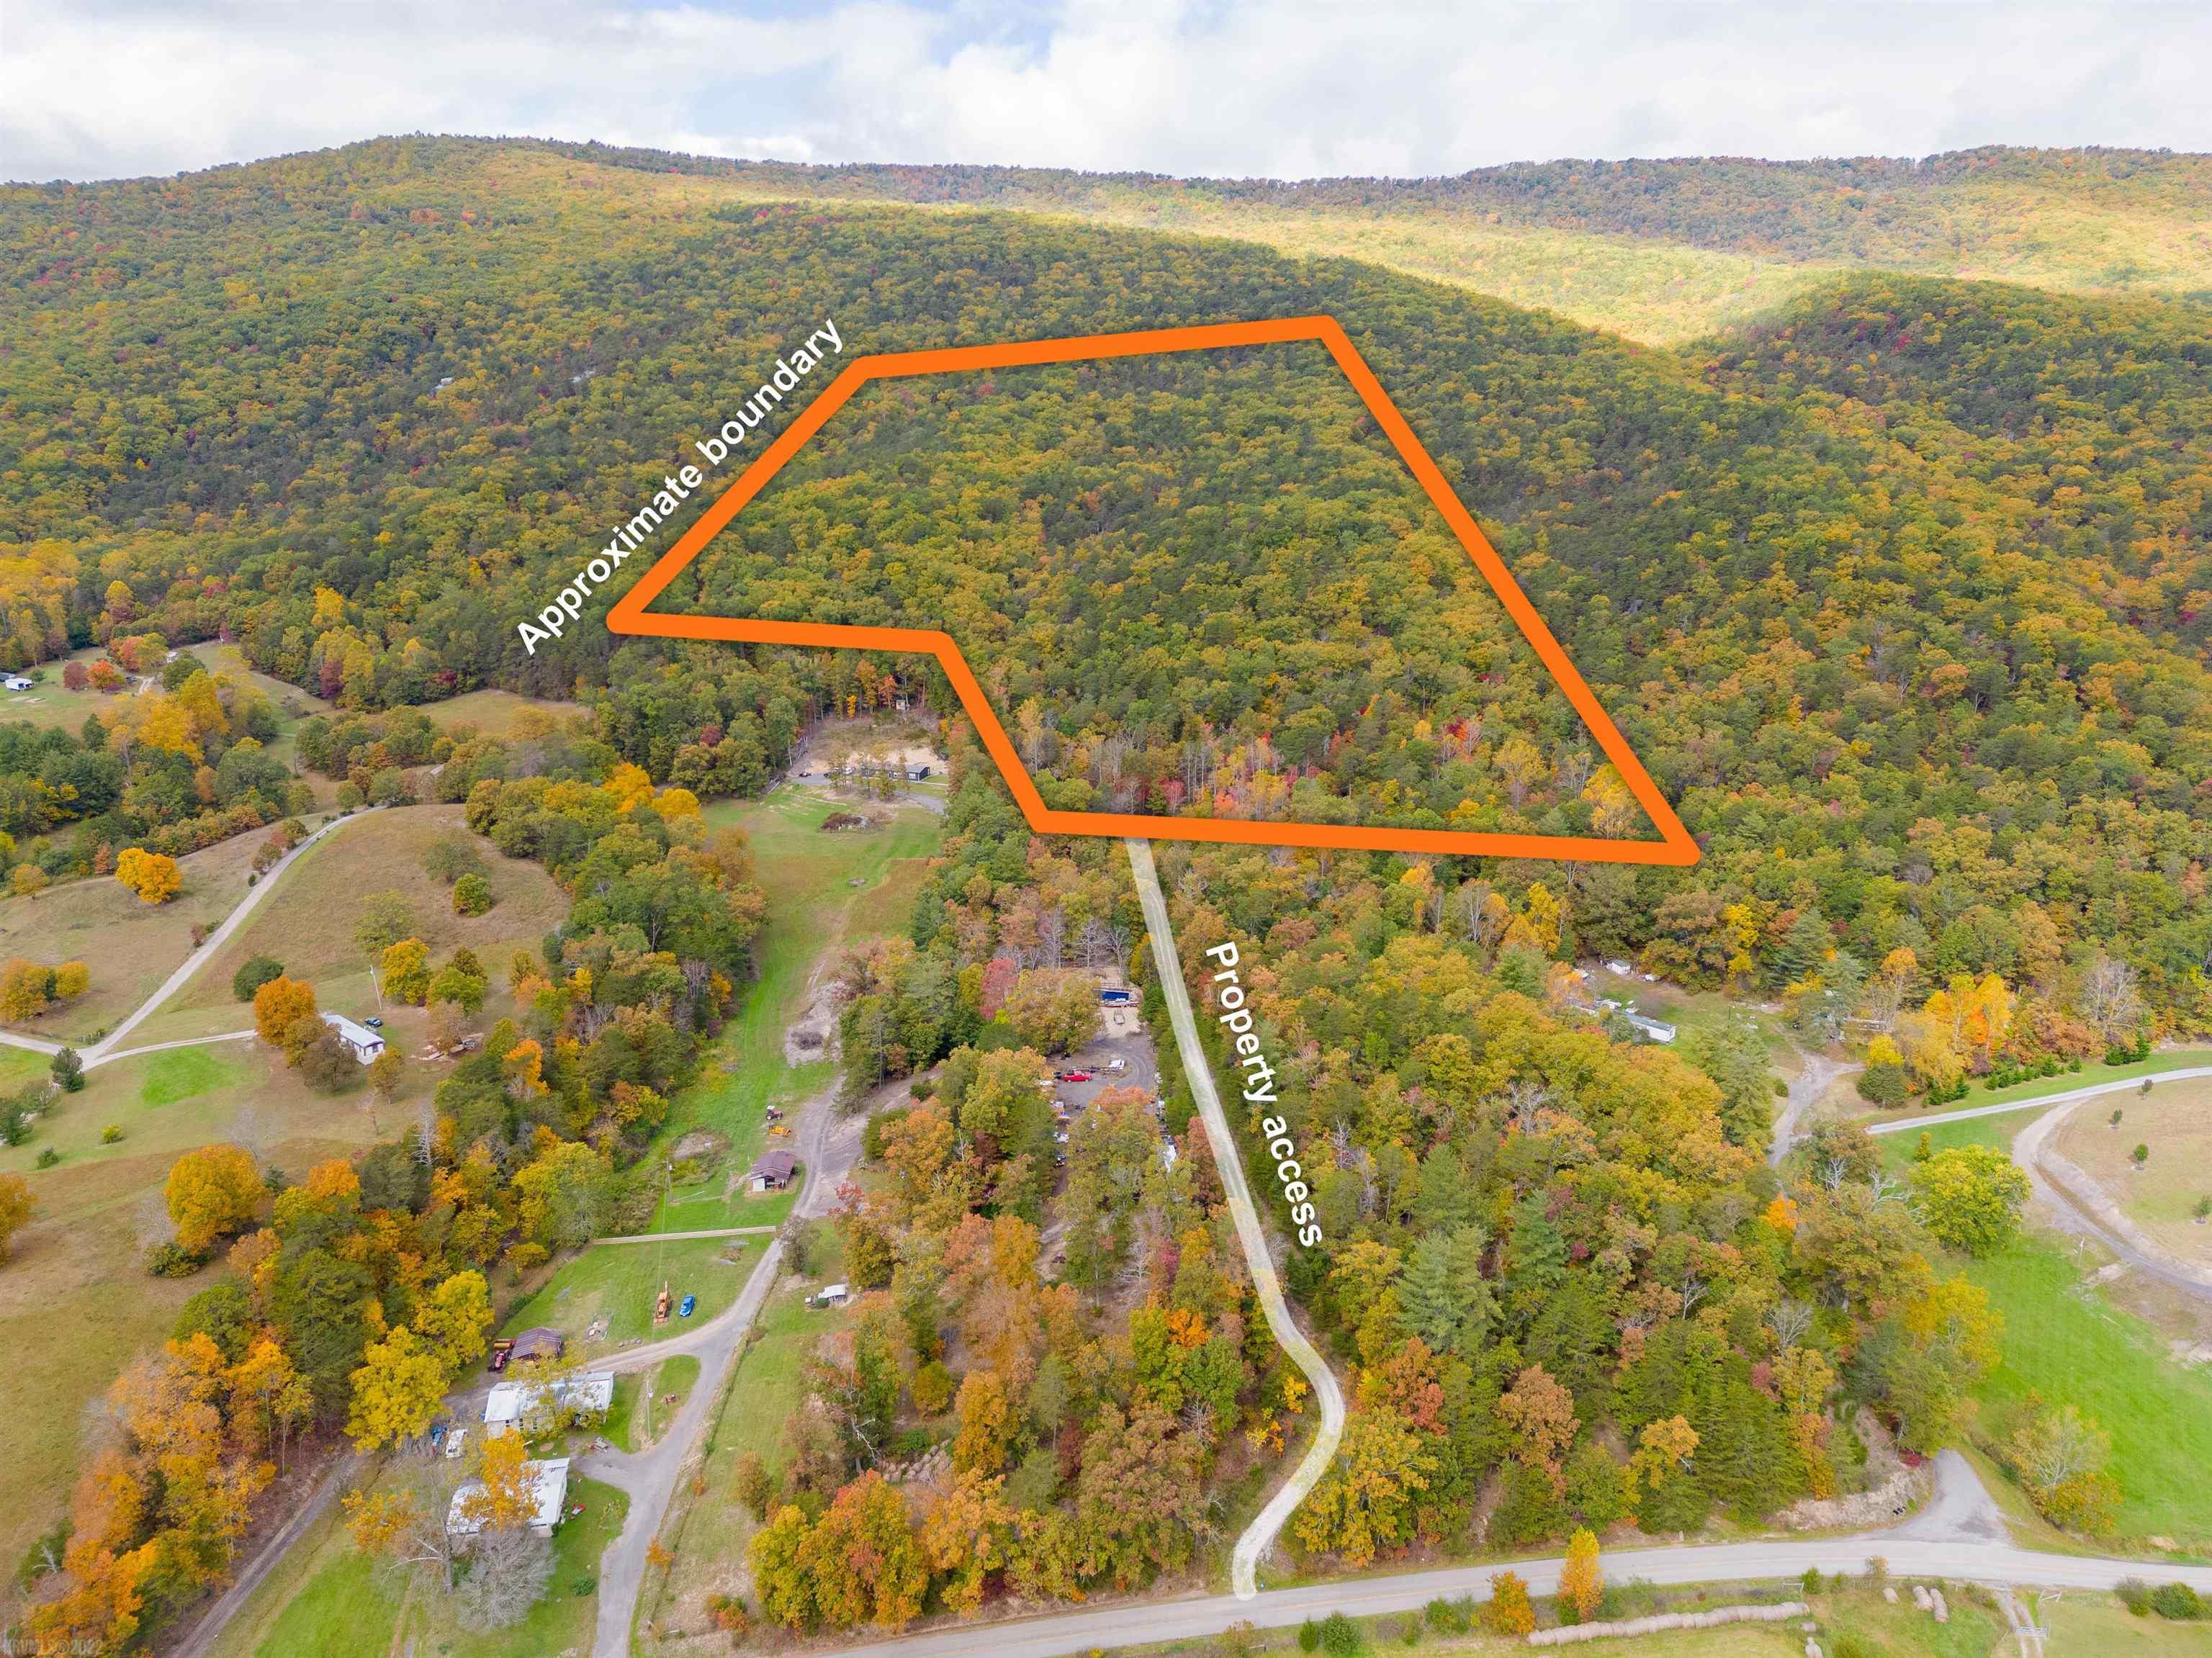 Over 34 acres just minutes from I-81 and less than 30 minutes from Blacksburg, Christiansburg, and Salem. Enjoy privacy set back from Bradshaw Rd but with a convenient deeded right-of-way and soils test results already in hand for the beautiful building site at the base of the hill. The mountain woods could be your "backyard" with wild blueberries, room to blaze your own trails, and a great little camping spot with unique rock outcroppings. Come check out the views!